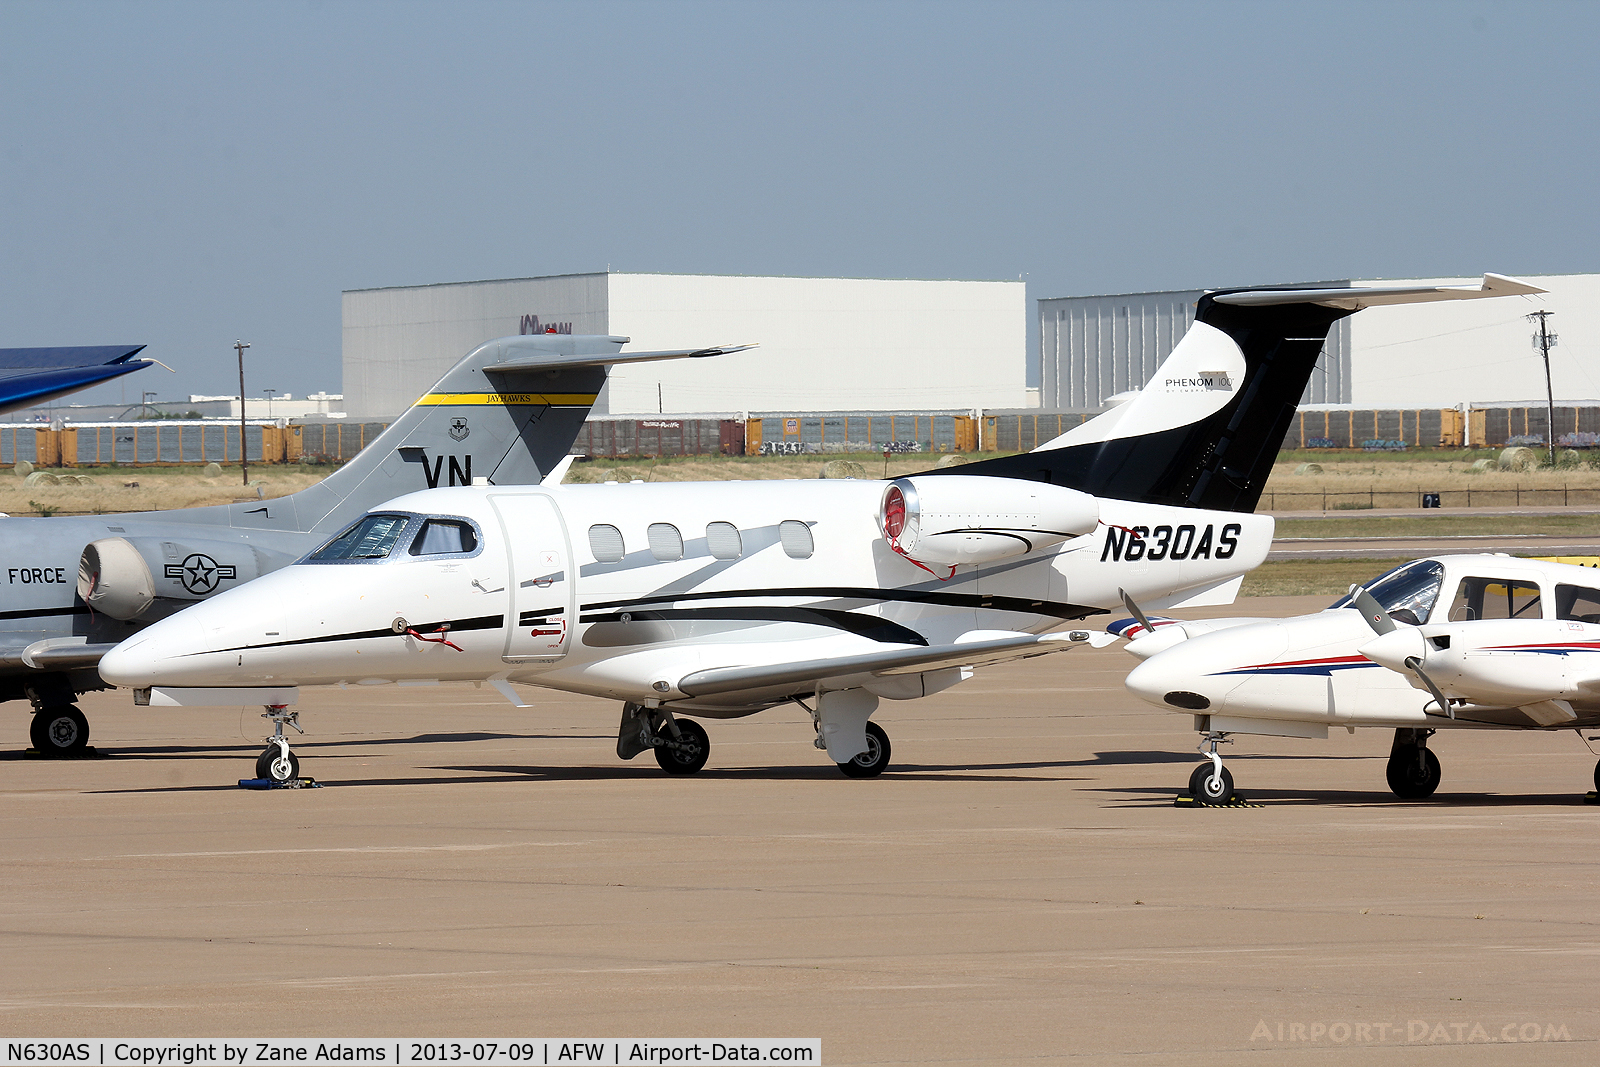 N630AS, 2011 Embraer EMB-500 Phenom 100 C/N 50000228, At Alliance Airport - Fort Worth, TX